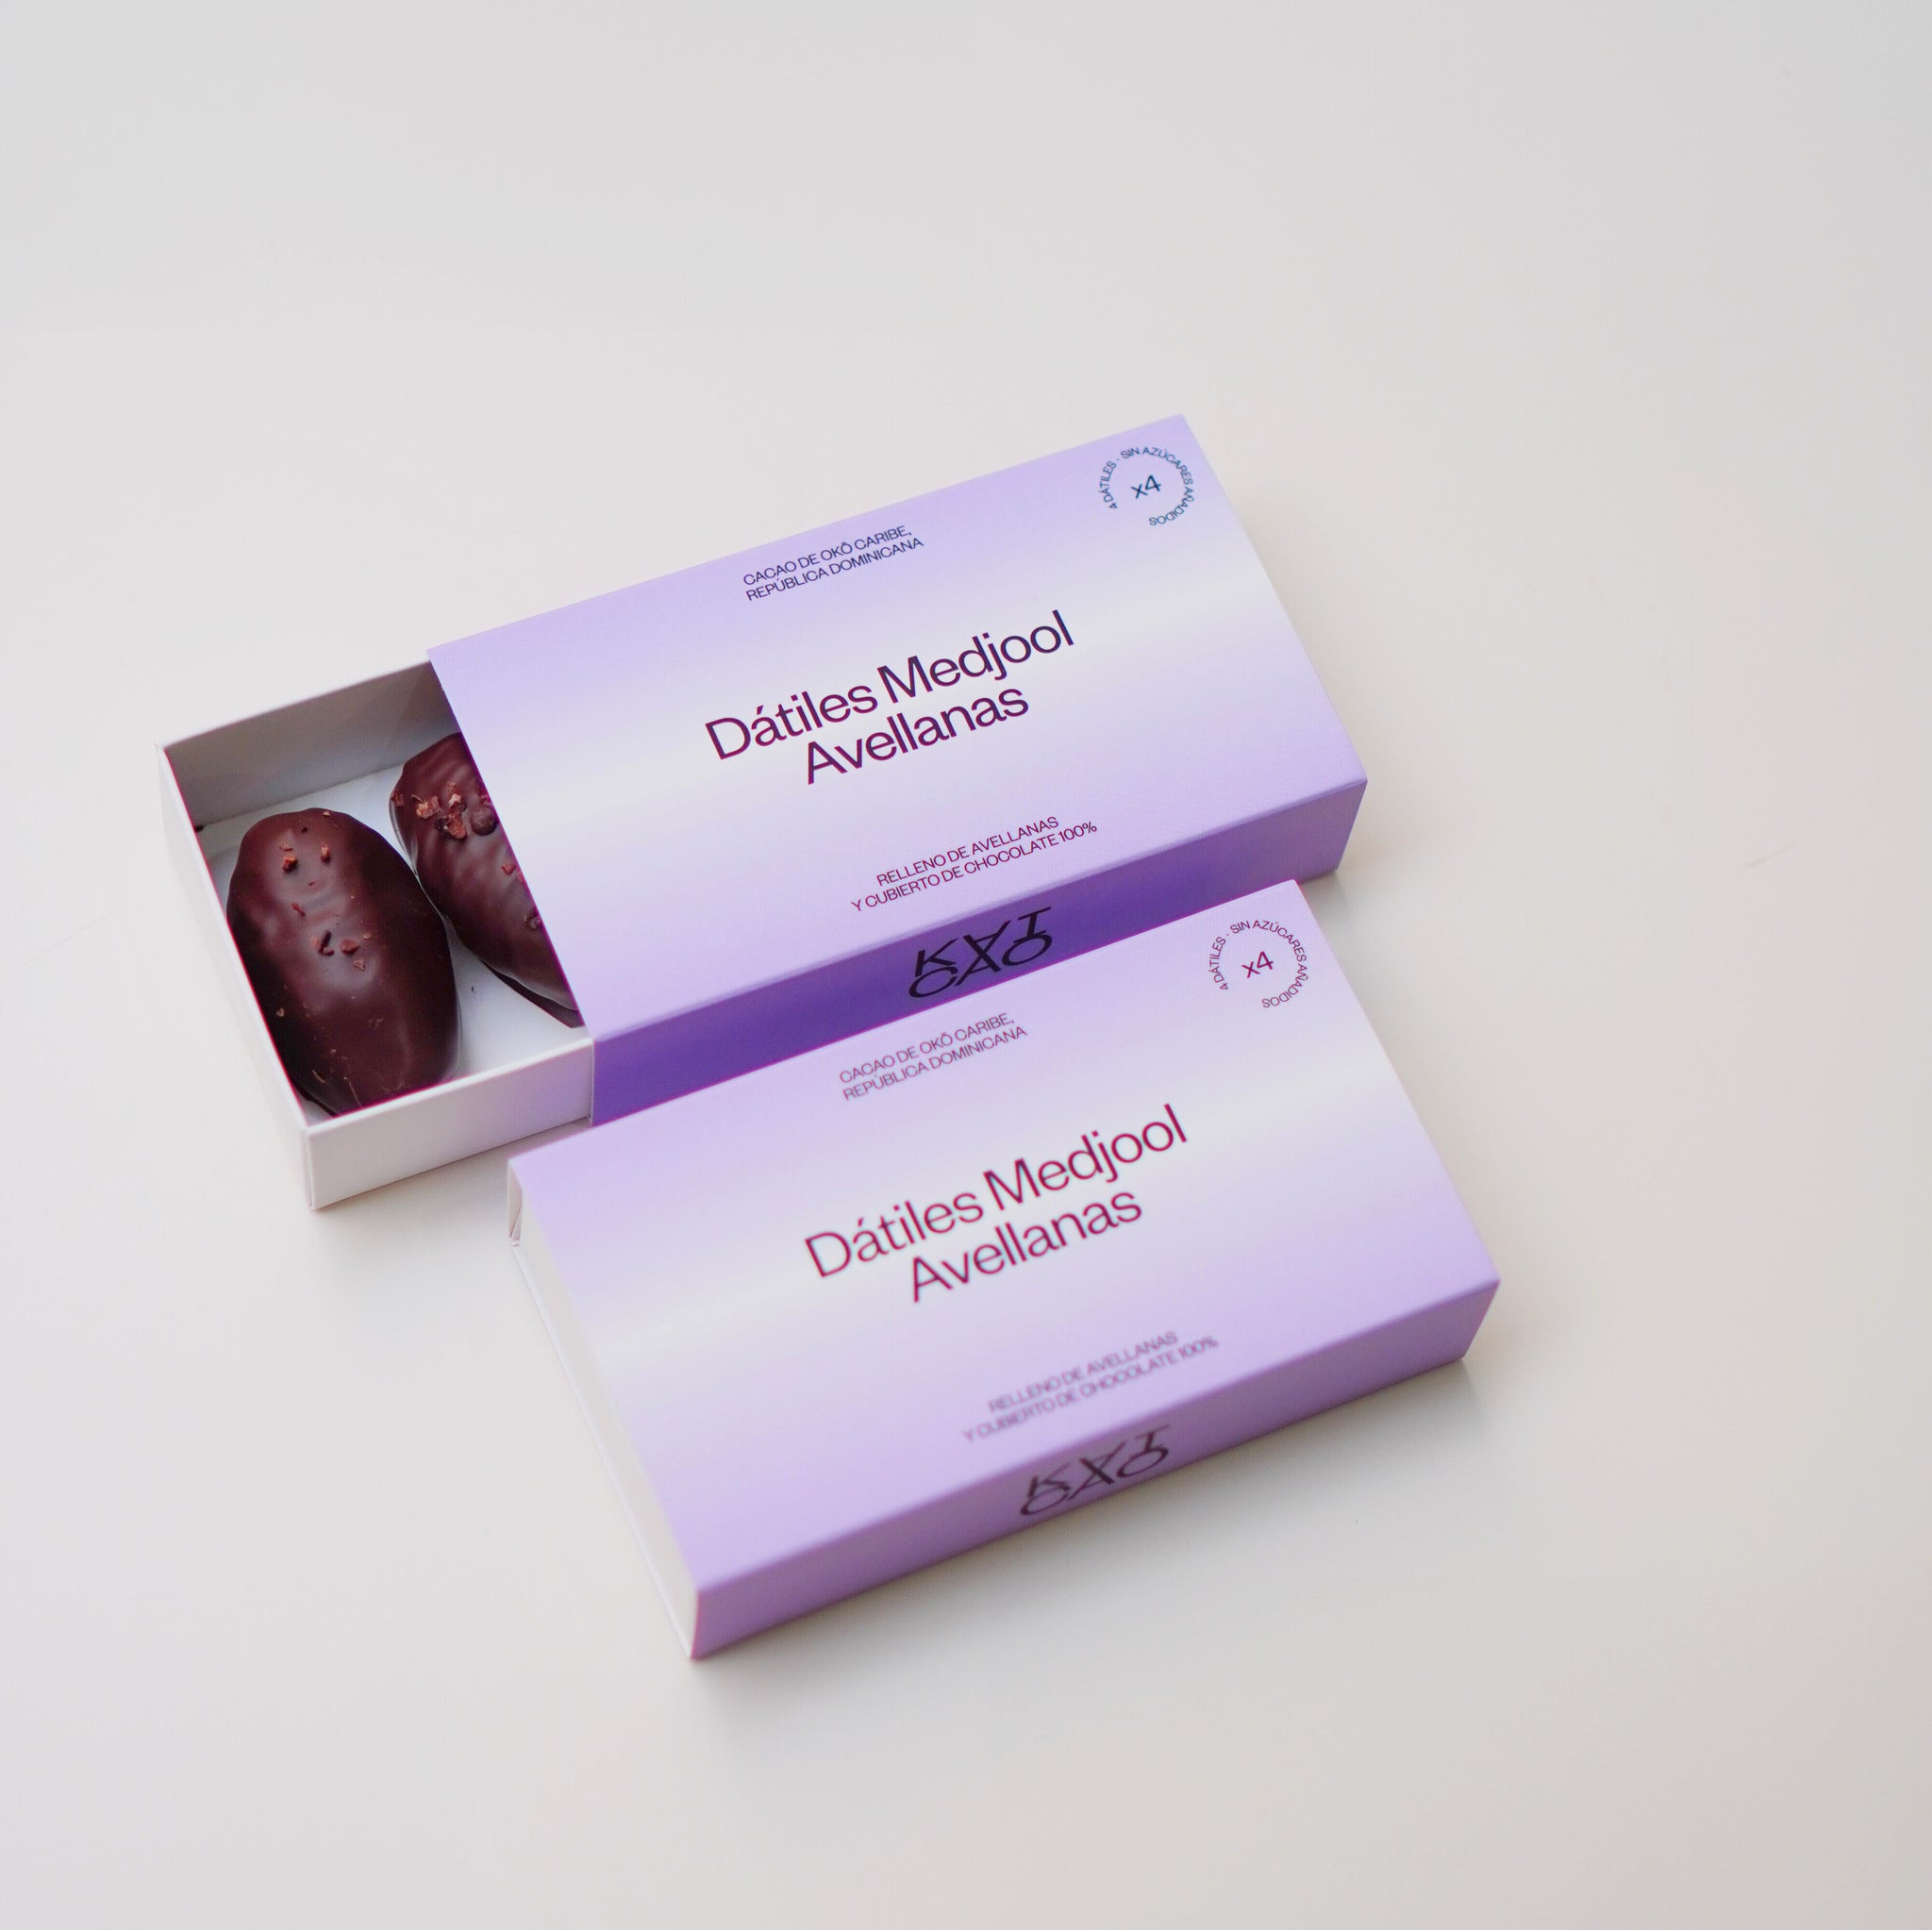 Medjool Date Filled With Hazelnuts Covered with 100% Chocolate